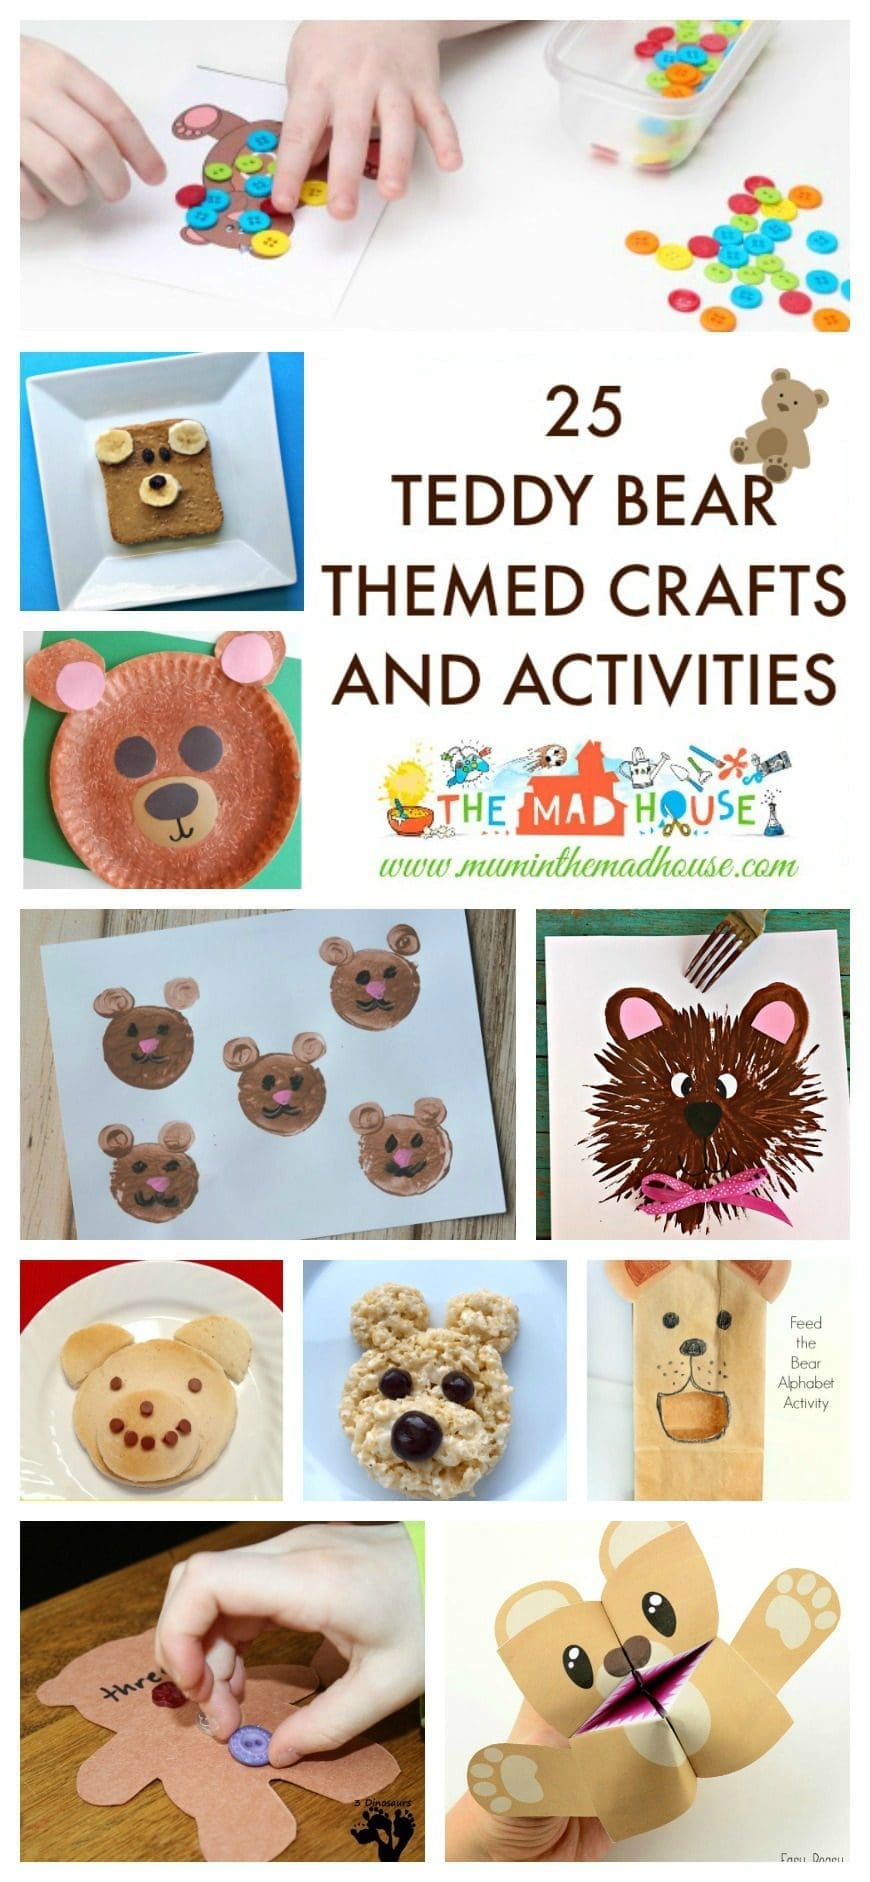  Celebrate all things Teddy Bear with this roundup of teddy bear activities, crafts and foods ideas to suit toddlers, preschoolers and school aged kids.  You will find lots of art and craft inspiration, along with free teddy bear themed printables perfect for children. 